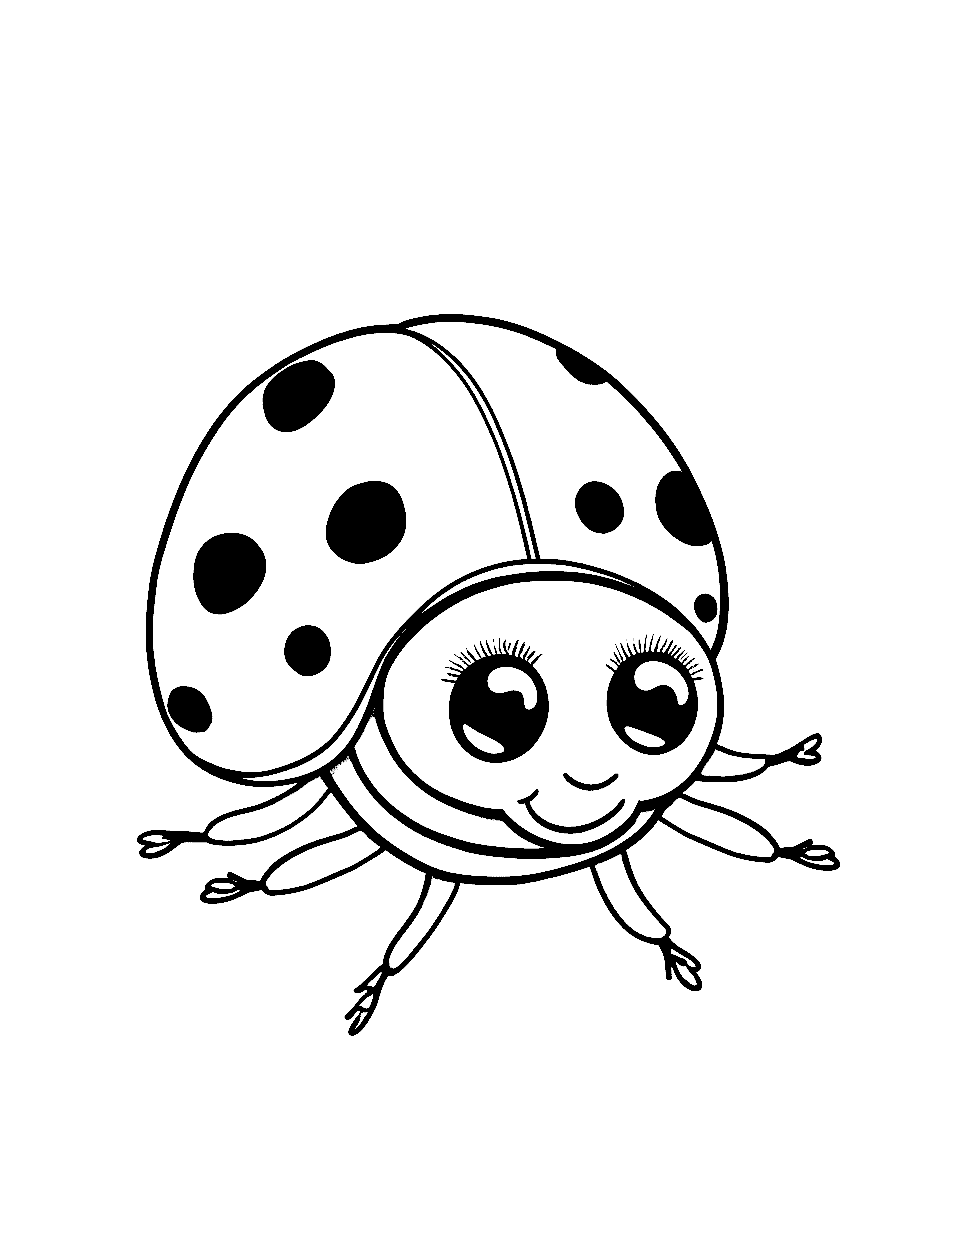 Baby Ladybug's First Steps Ladybug Coloring Page - A kawaii-style baby ladybug ready to walk for the first time.